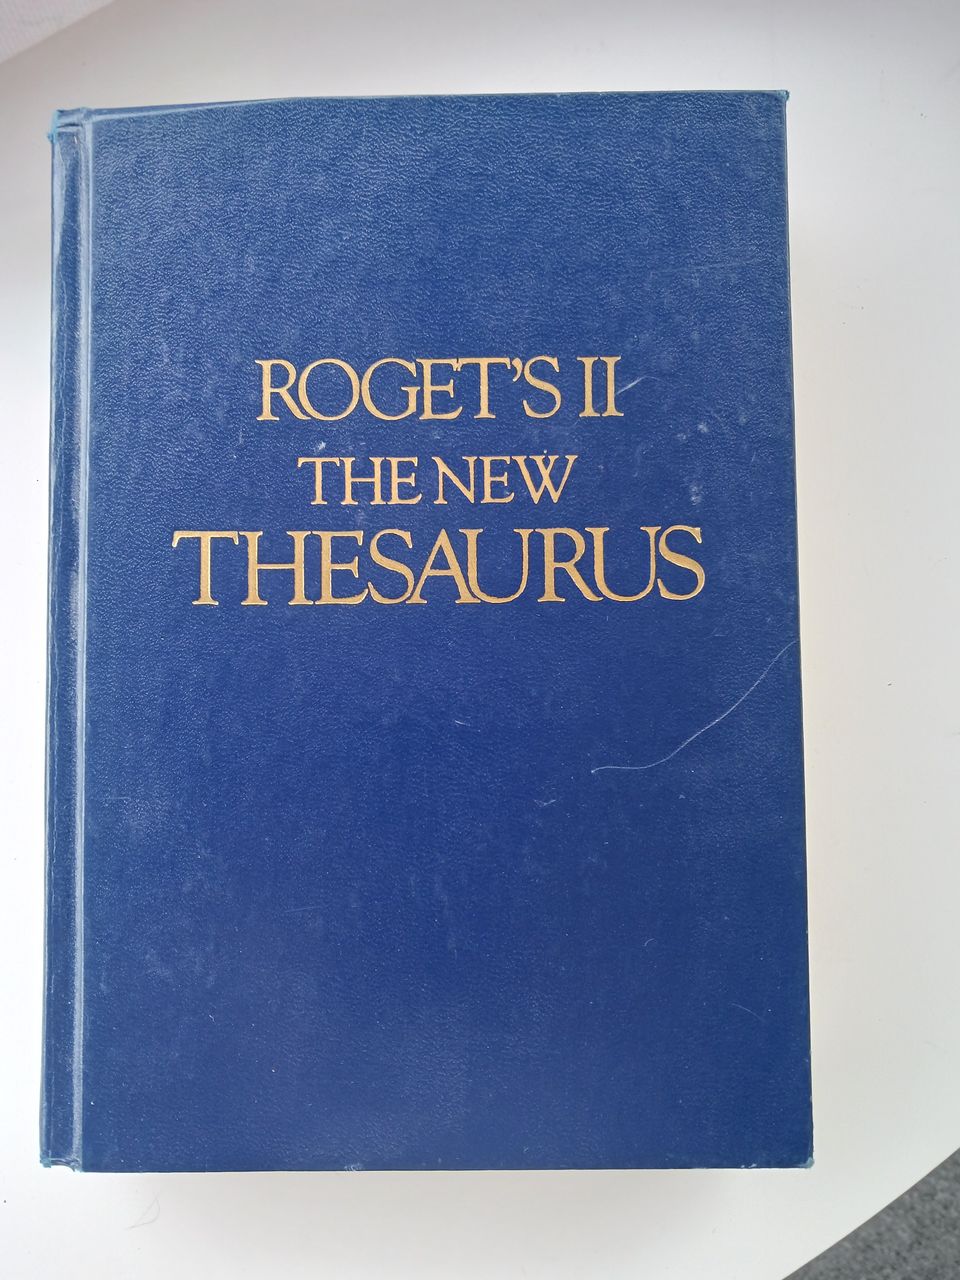 Rogets II The New Thesaurus